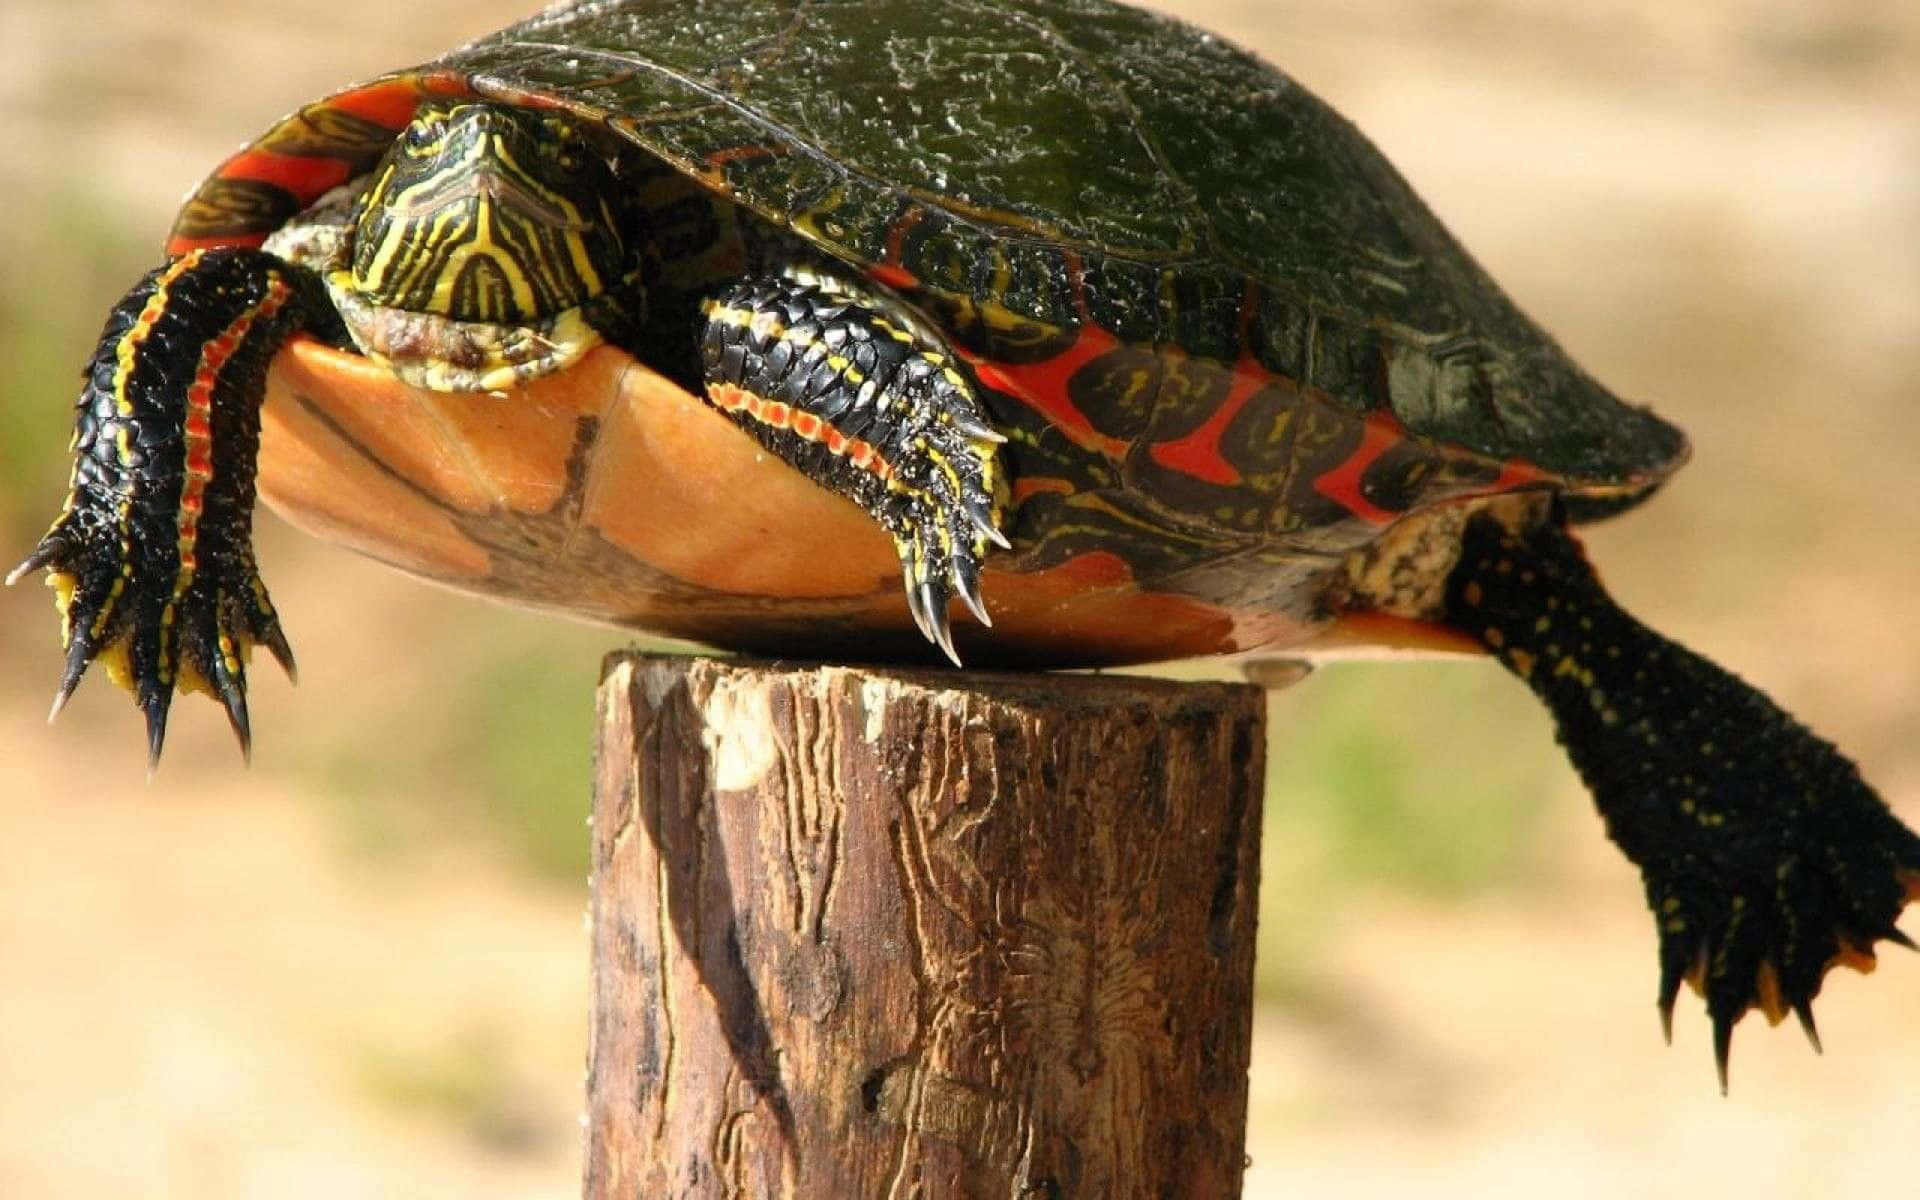 A Red-eared Slider Turtle Is Sitting On Top Of A Wooden Post